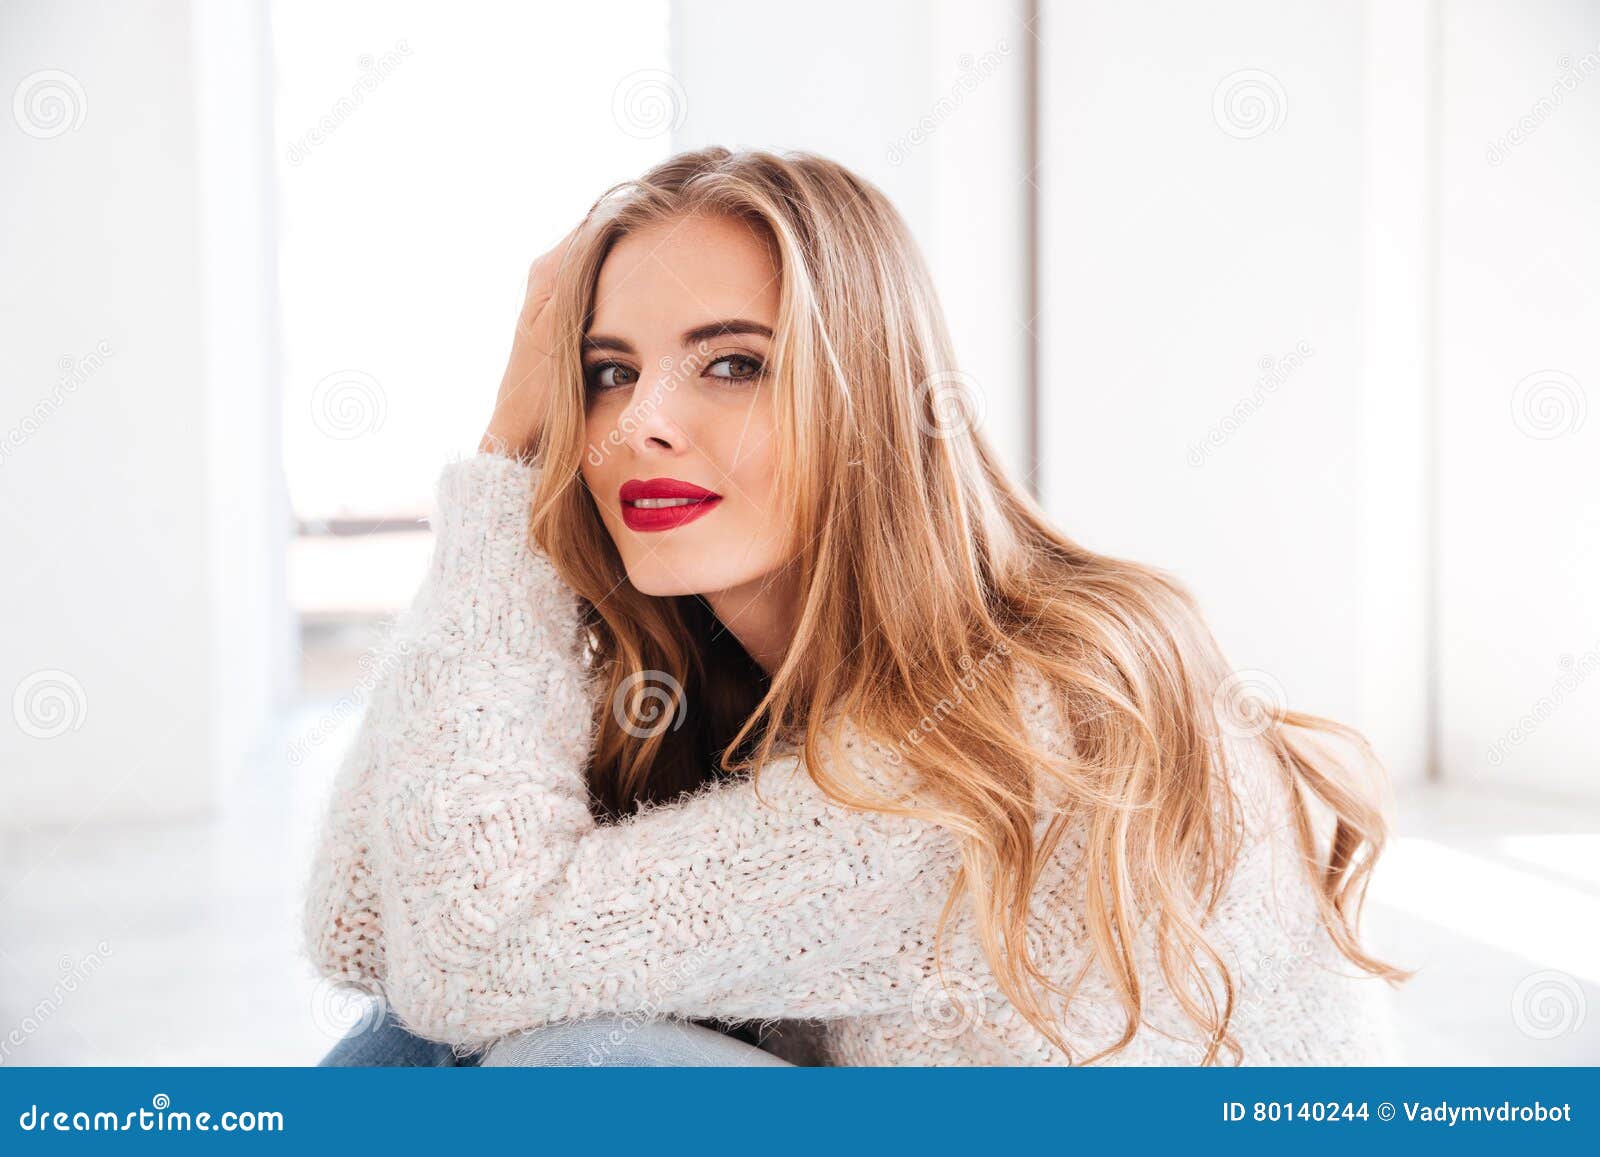 portrait of attractive young woman wearing sweater and red lipstick